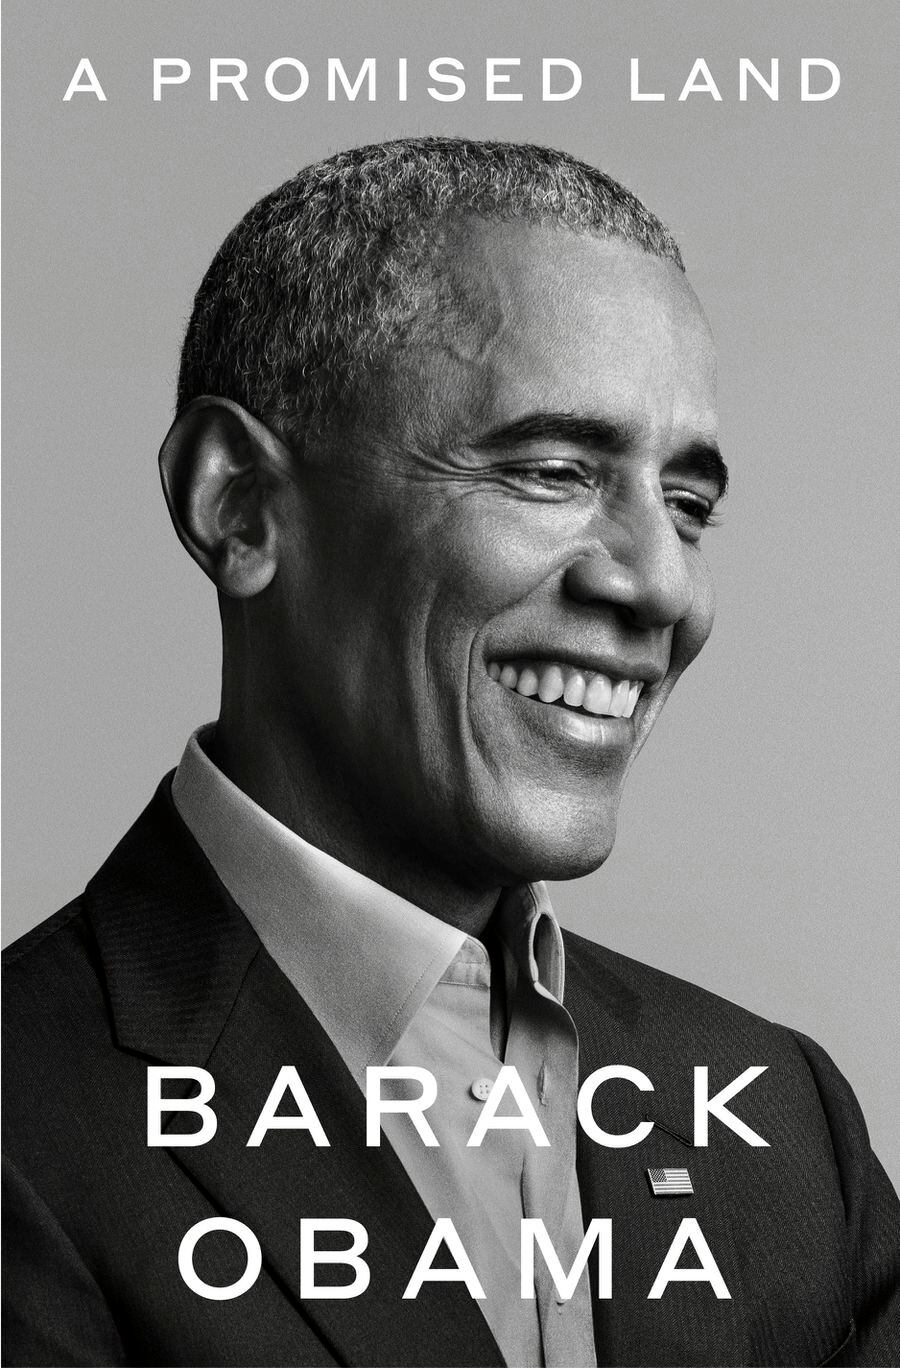  (Pari Dukovic/Random House via AP) This photo provided by Random House shows the cover of “A Promised Land." The first volume of former President Barack Obama’s memoir came out Nov. 17.